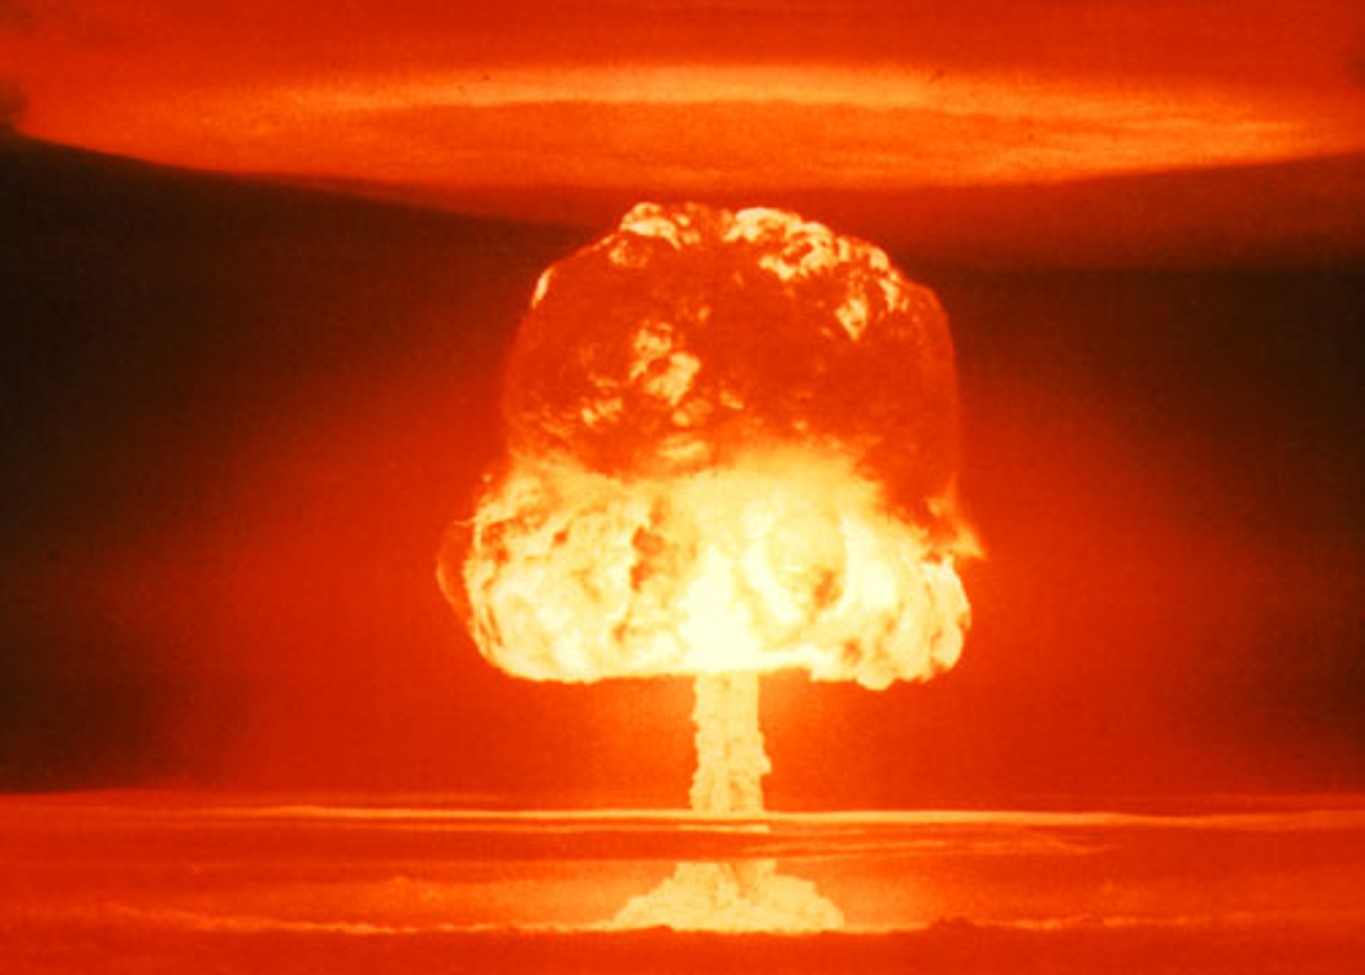 Essay: Nuclear Weapons